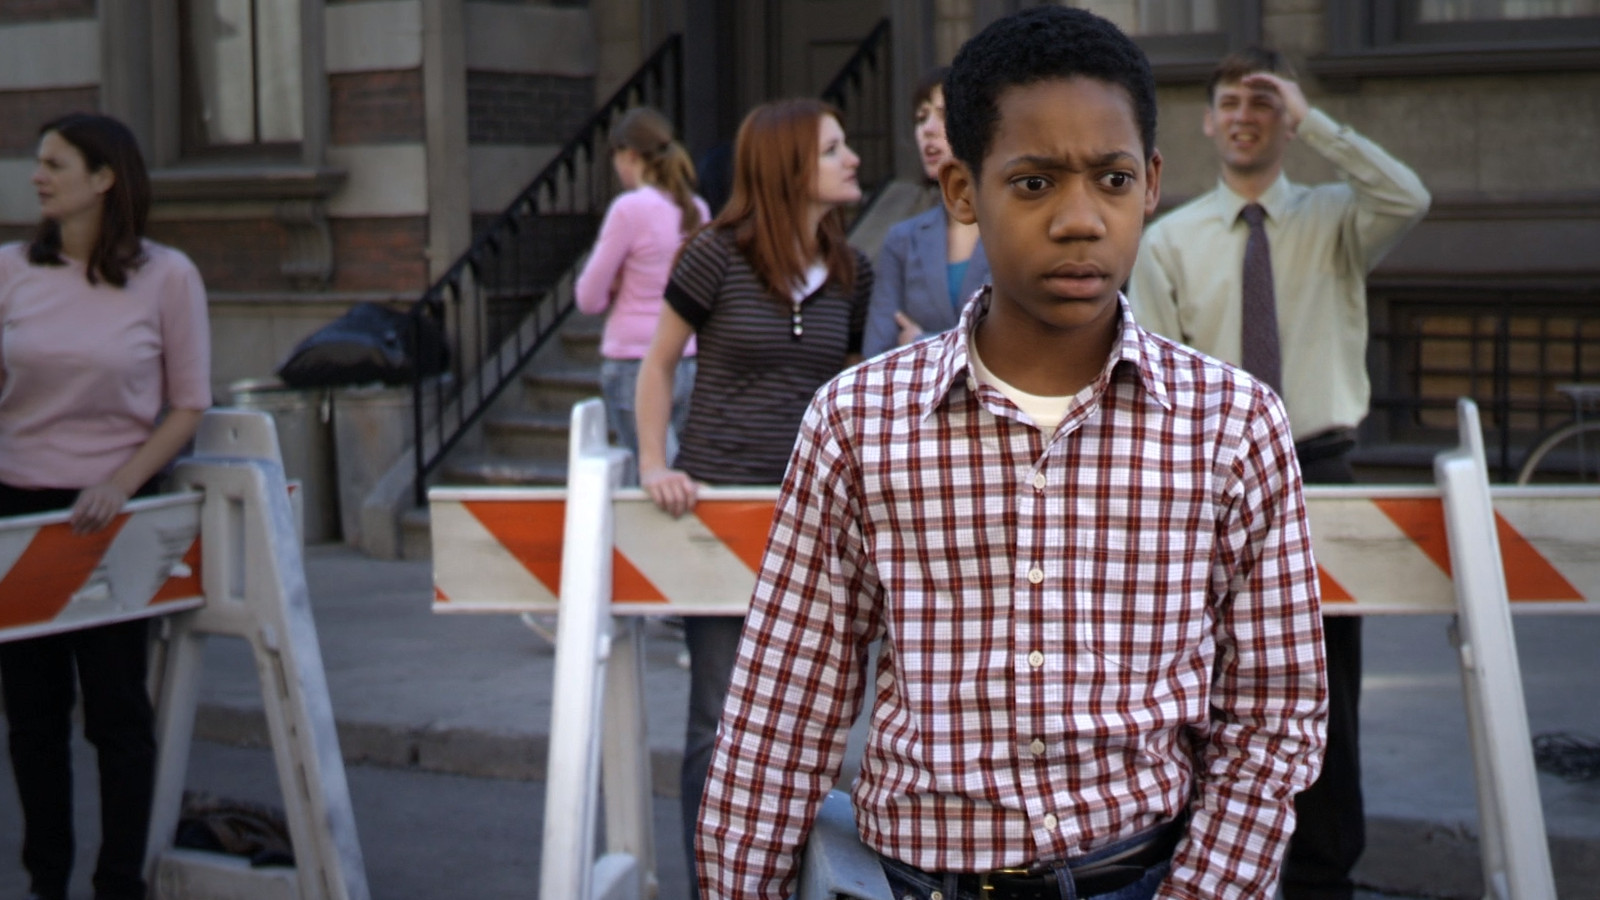 Everybody Hates Chris Wallpapers